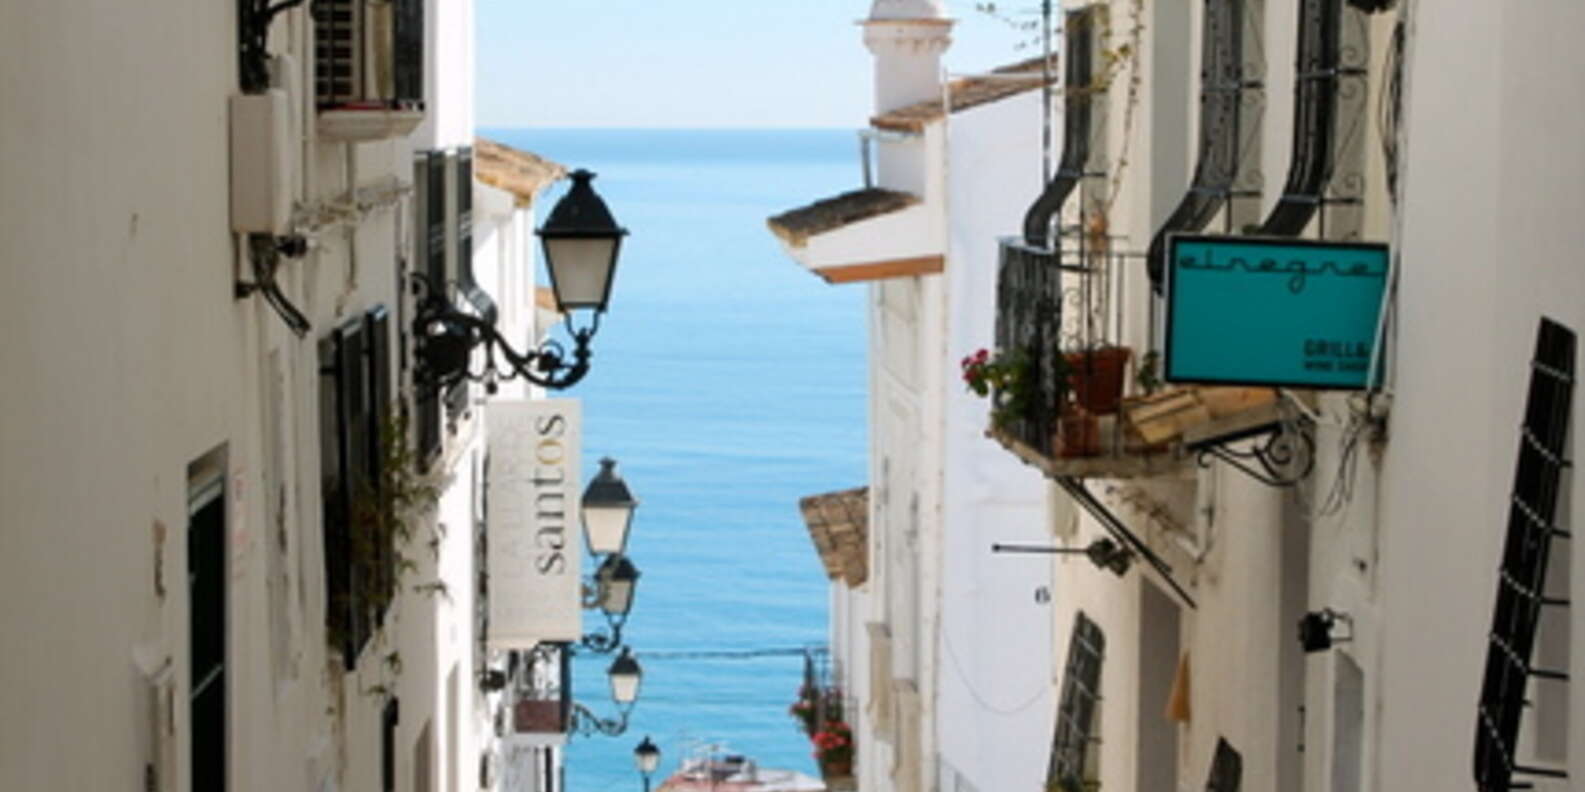 What to do in Altea